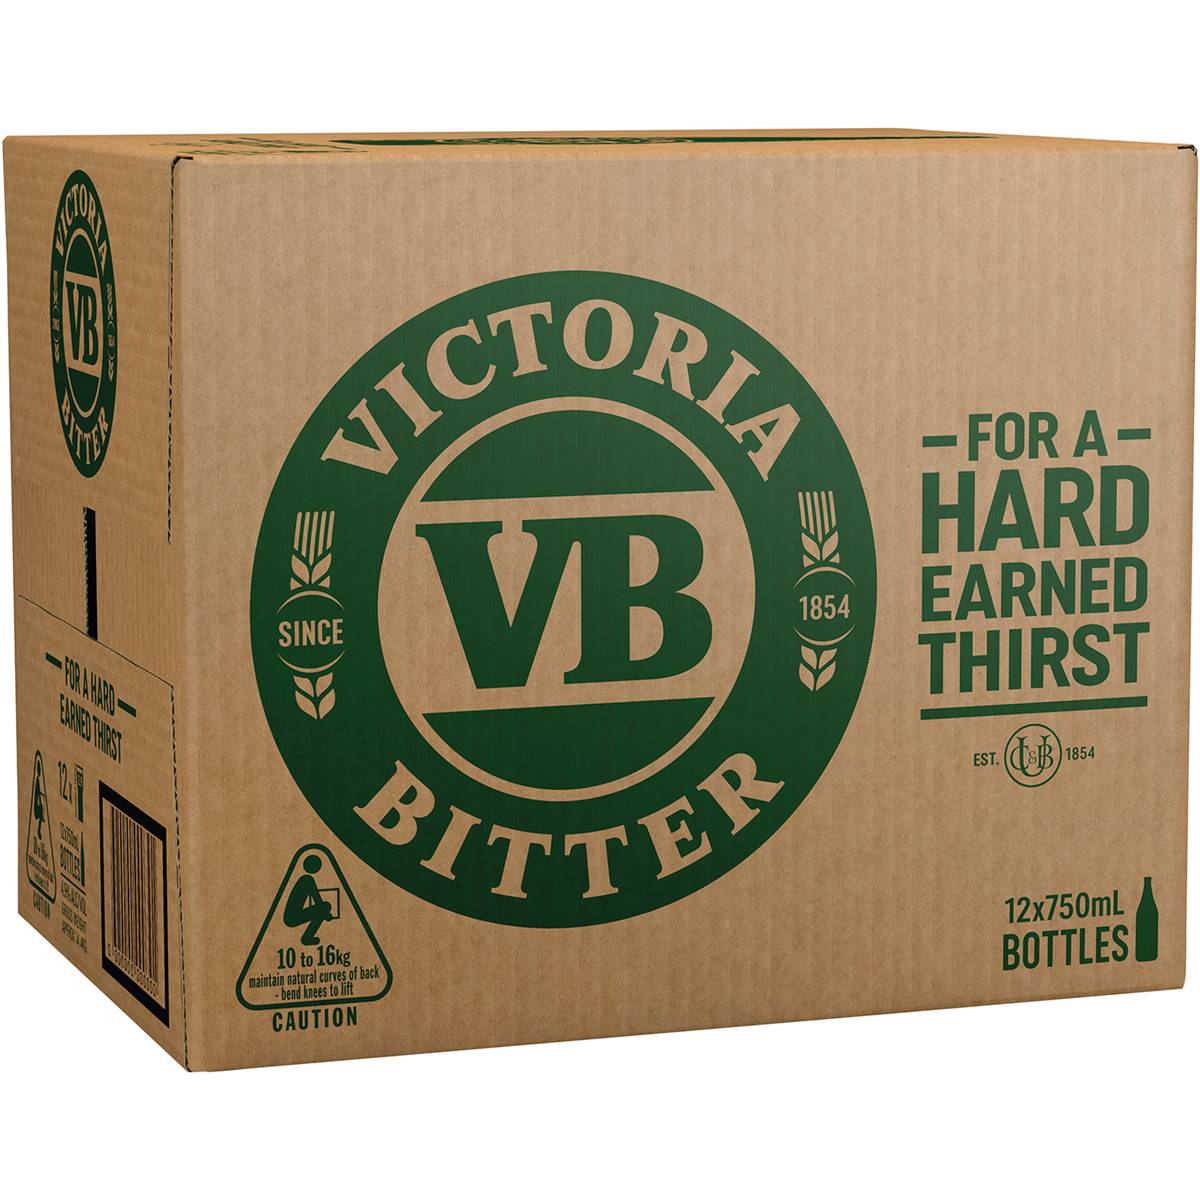 Calories in Victoria Bitter Lager Long Necks